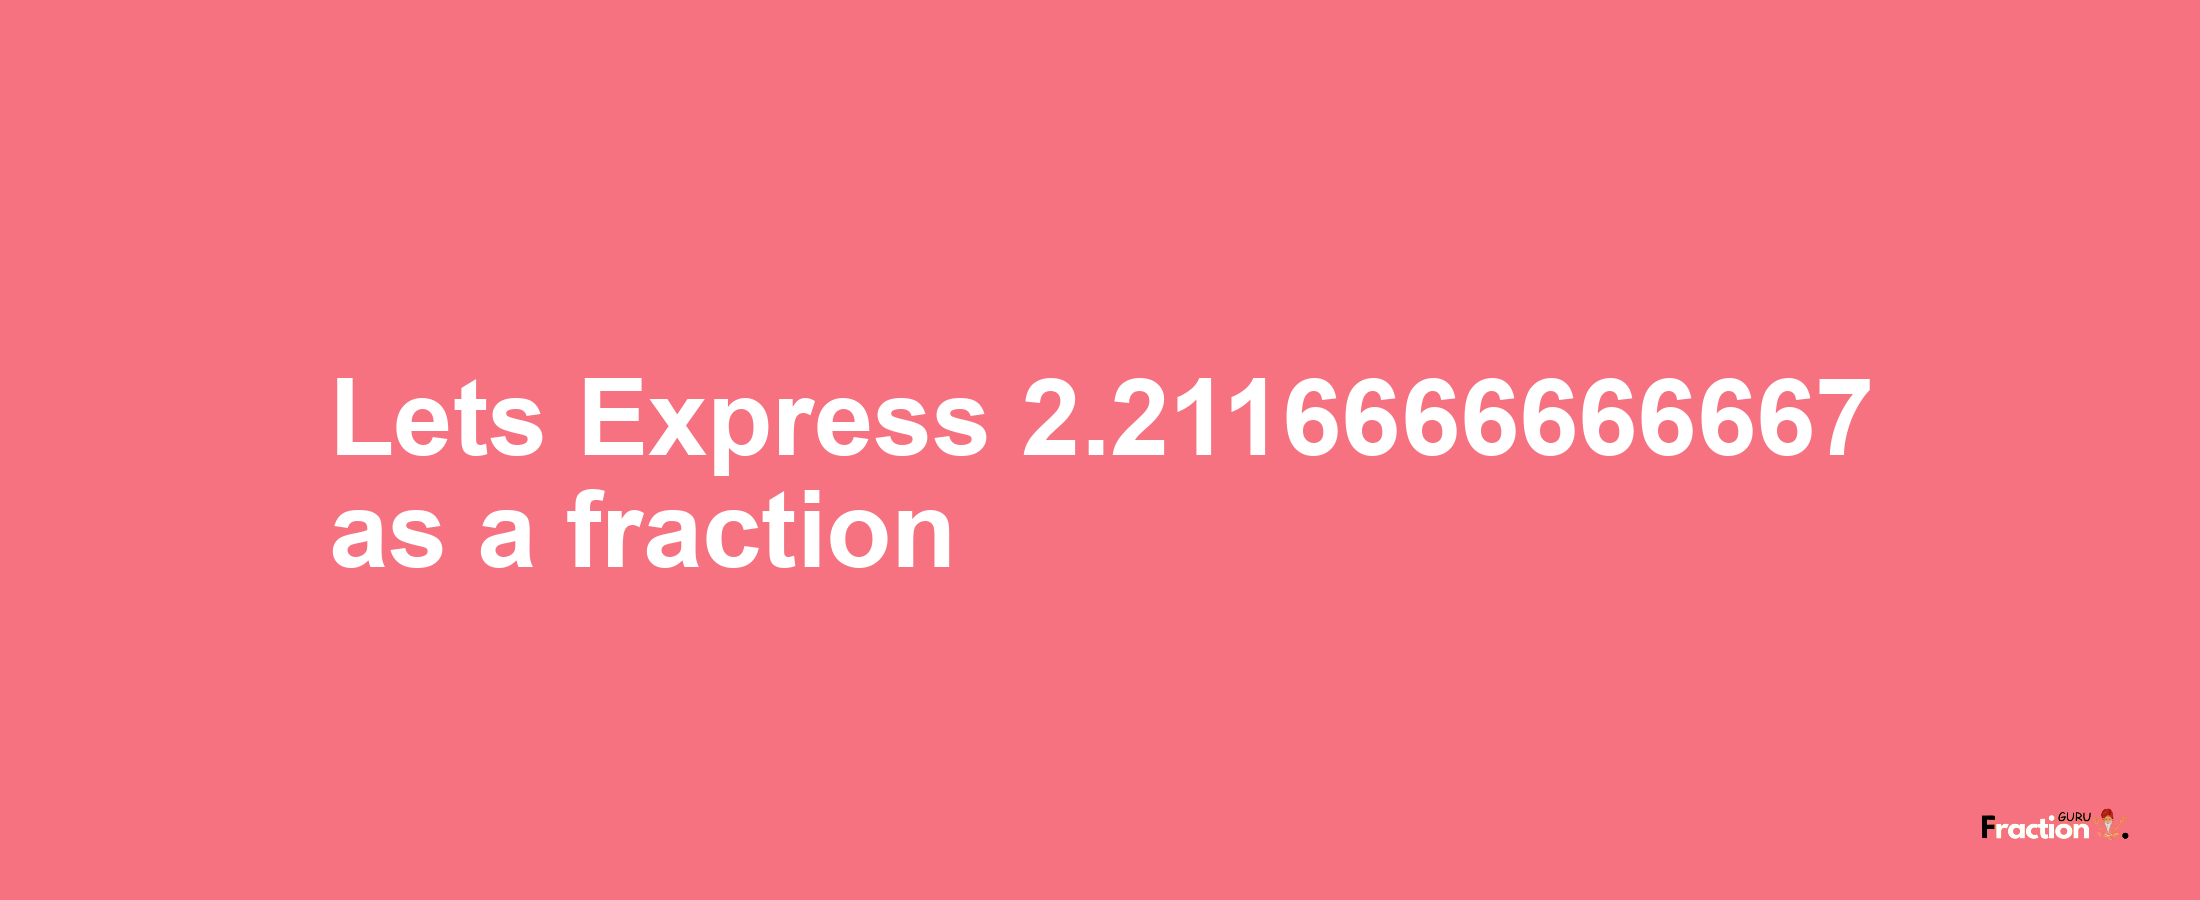 Lets Express 2.2116666666667 as afraction